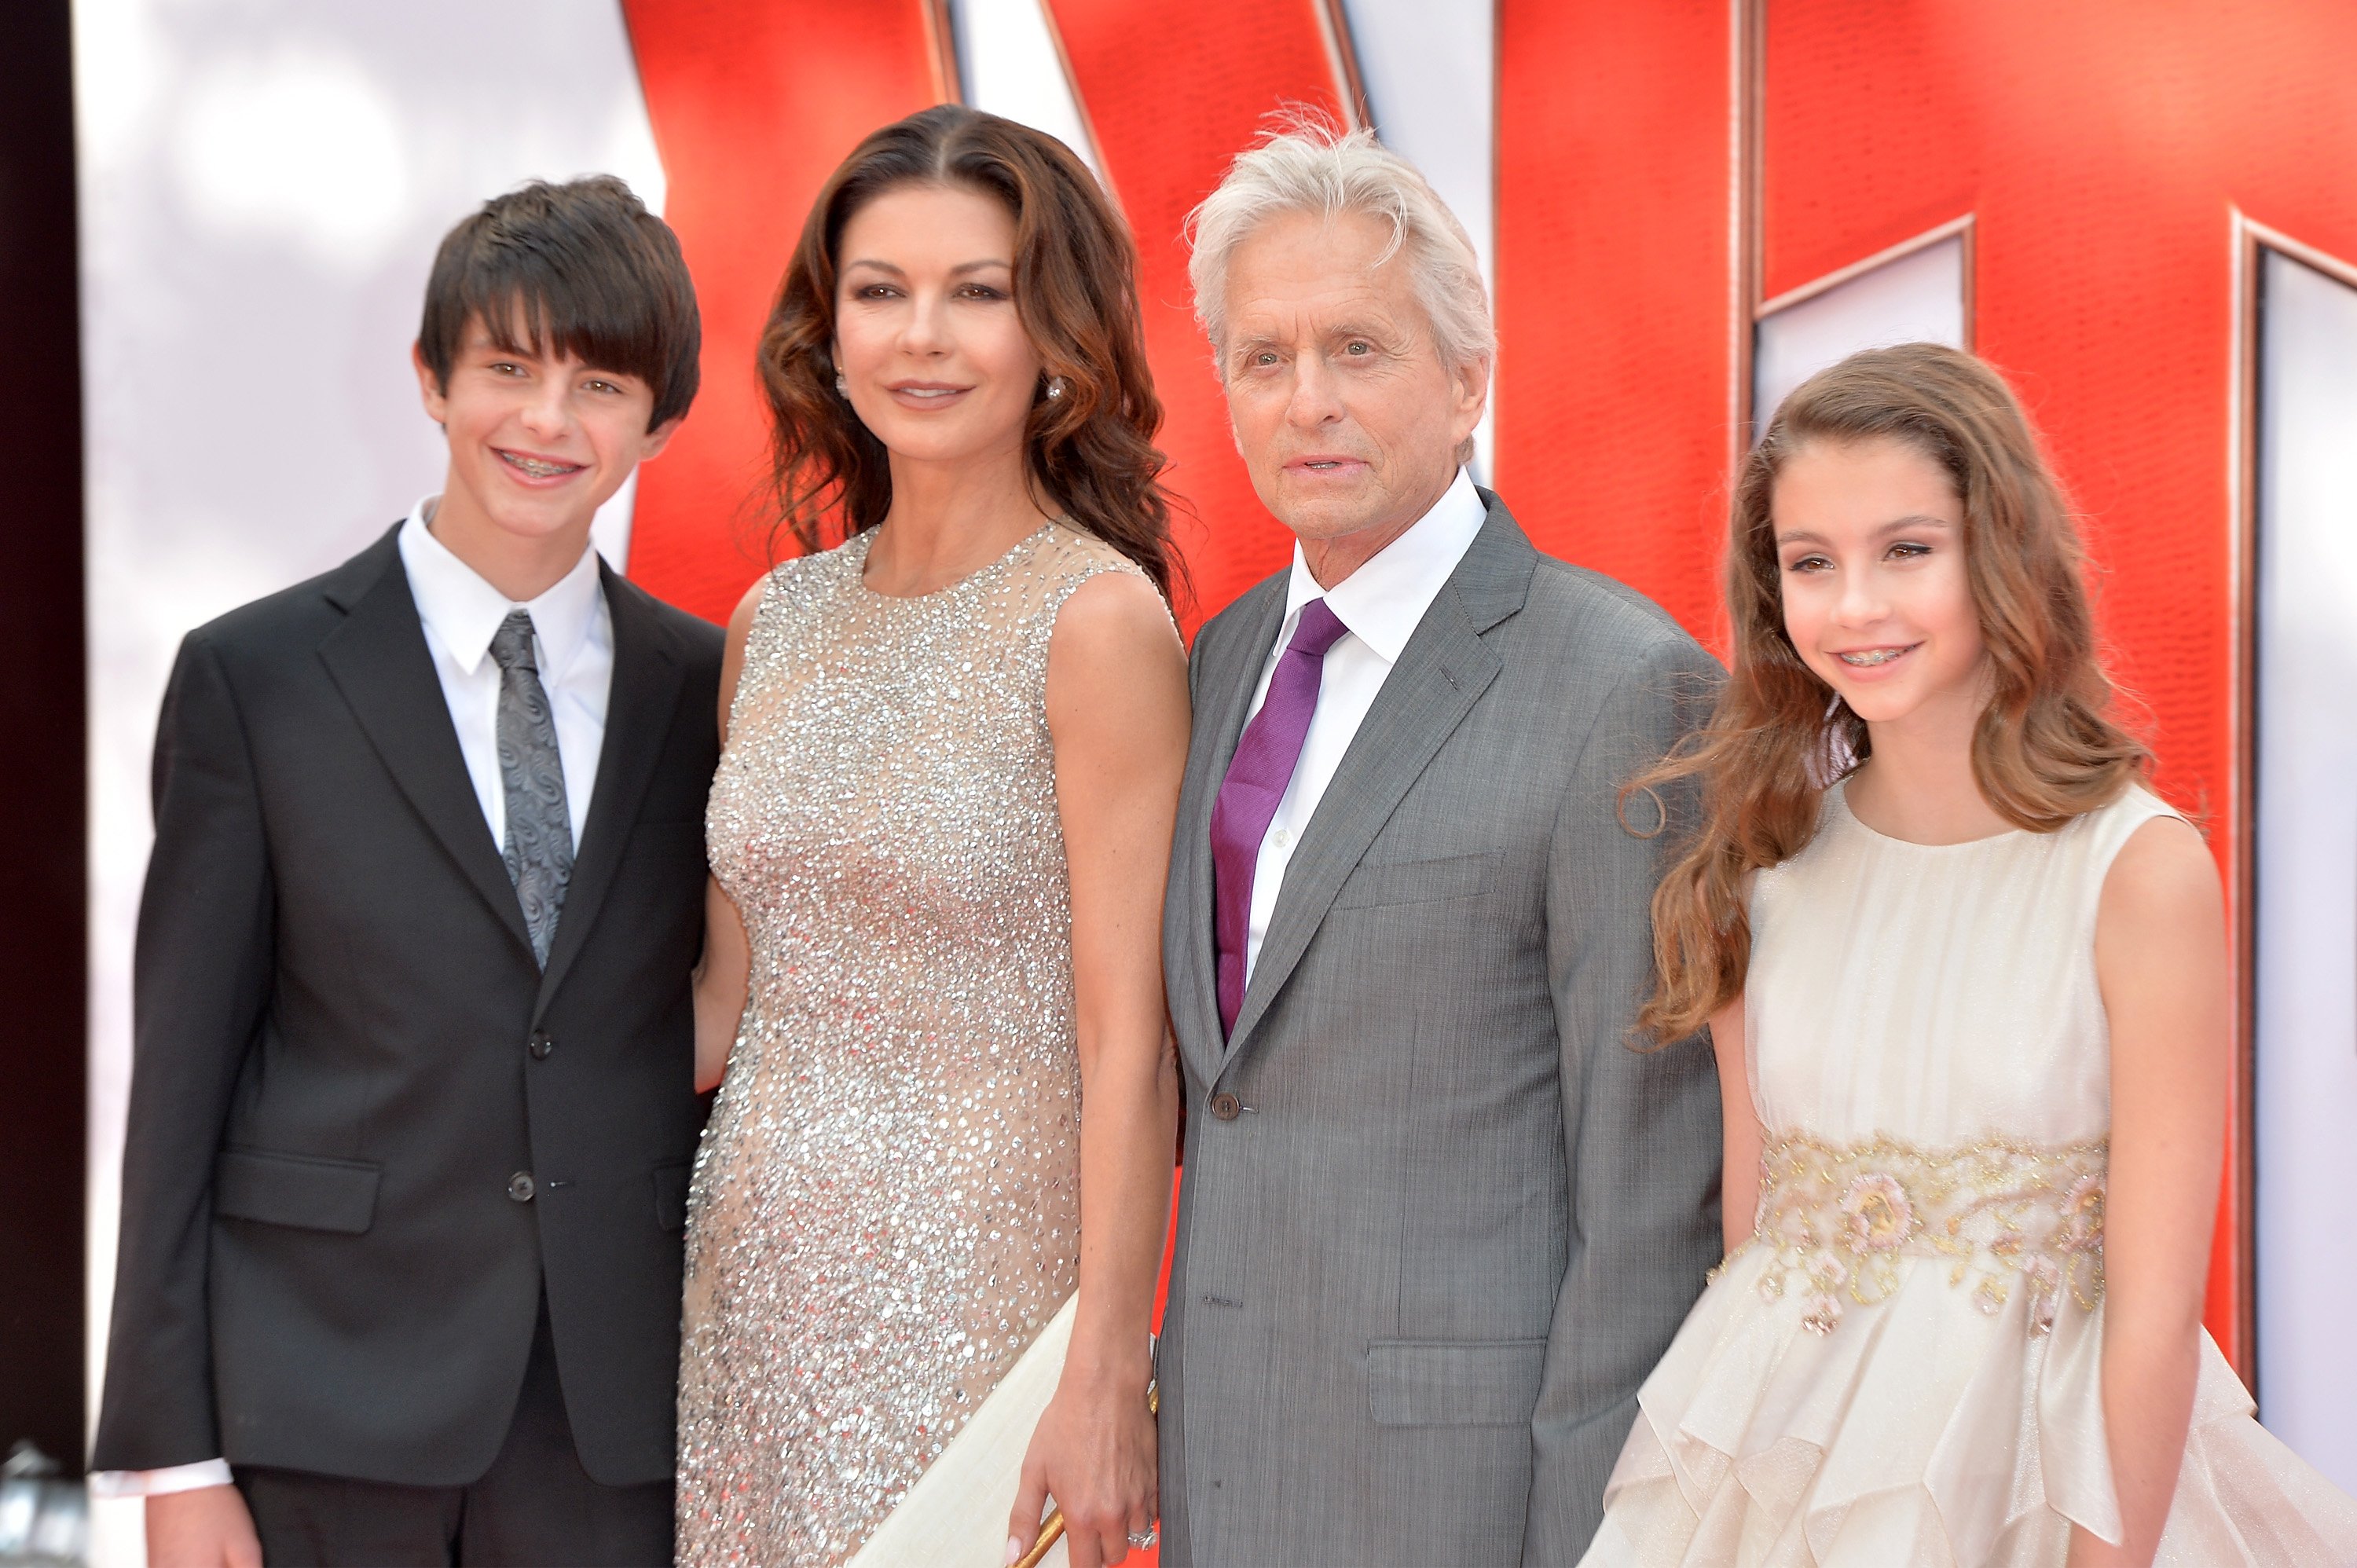 Dylan Douglas, Catherine Zeta-Jones, Michael Douglas, and Carys Douglas at the European Premiere of Marvel's "Ant-Man" on July 8, 2015, in London | Source: Getty Images